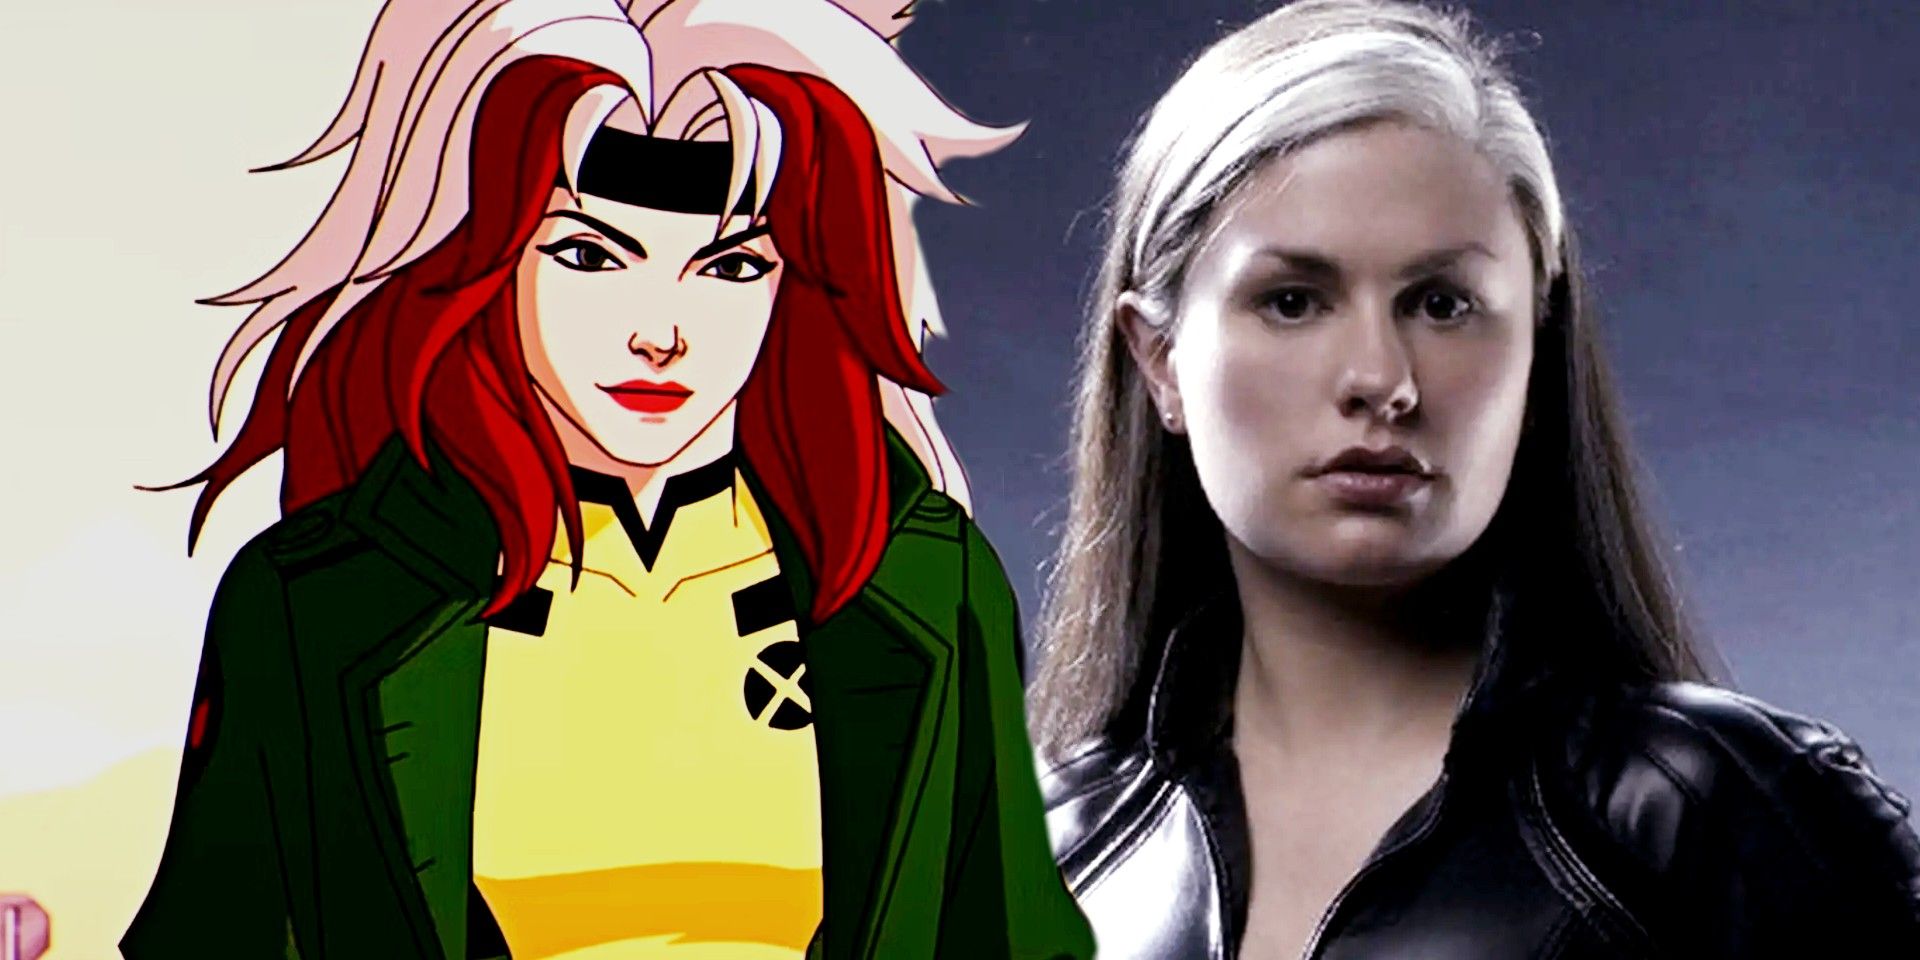 Rogue from X-Men '97 next to Anna Paquin's Rogue from X-Men